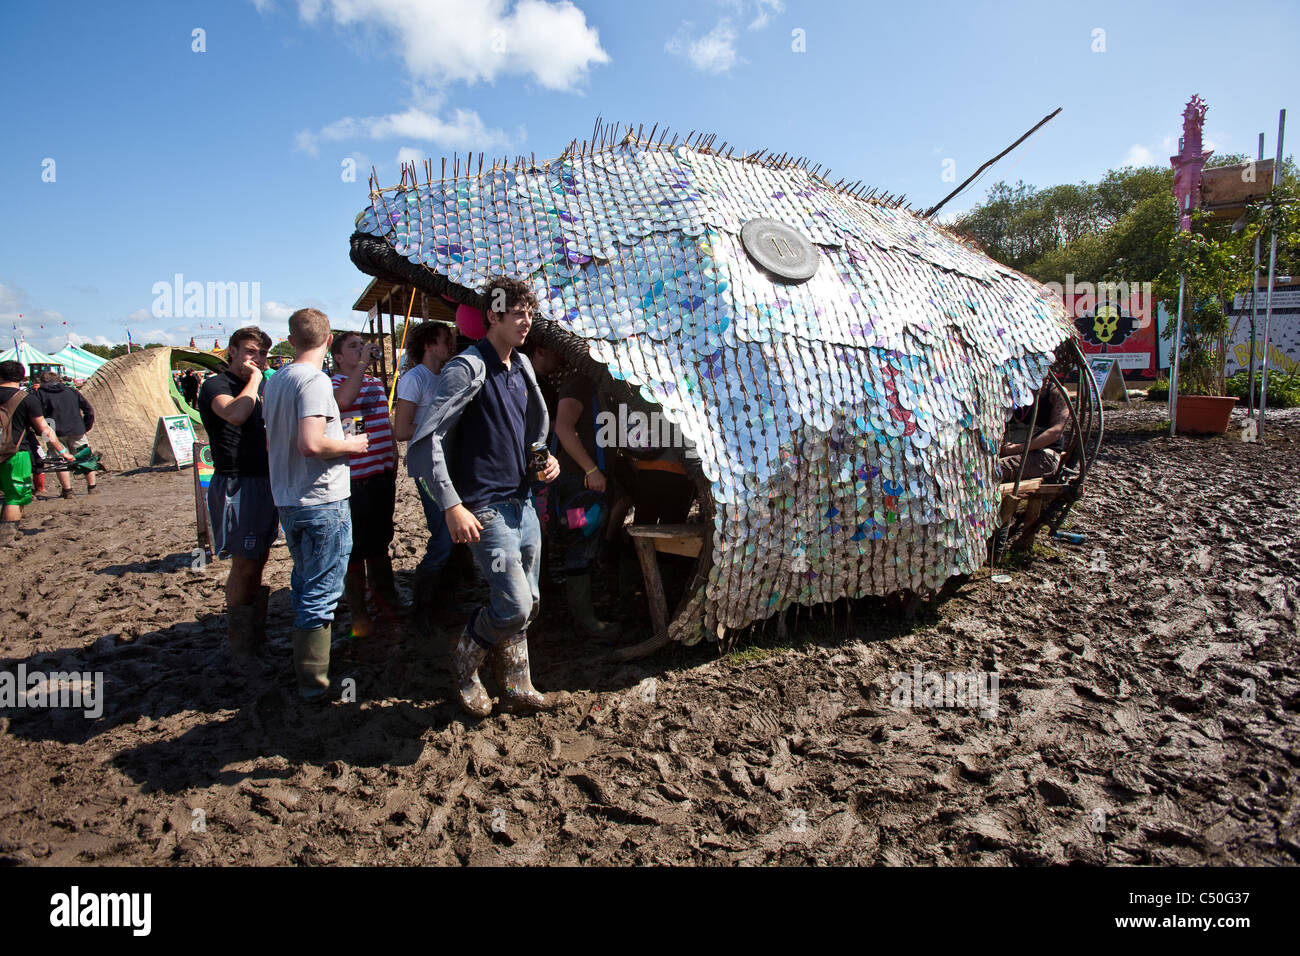 Fish sculpture made from recycled CD's. Greenpeace field, Glastonbury Festival 2011. Stock Photo